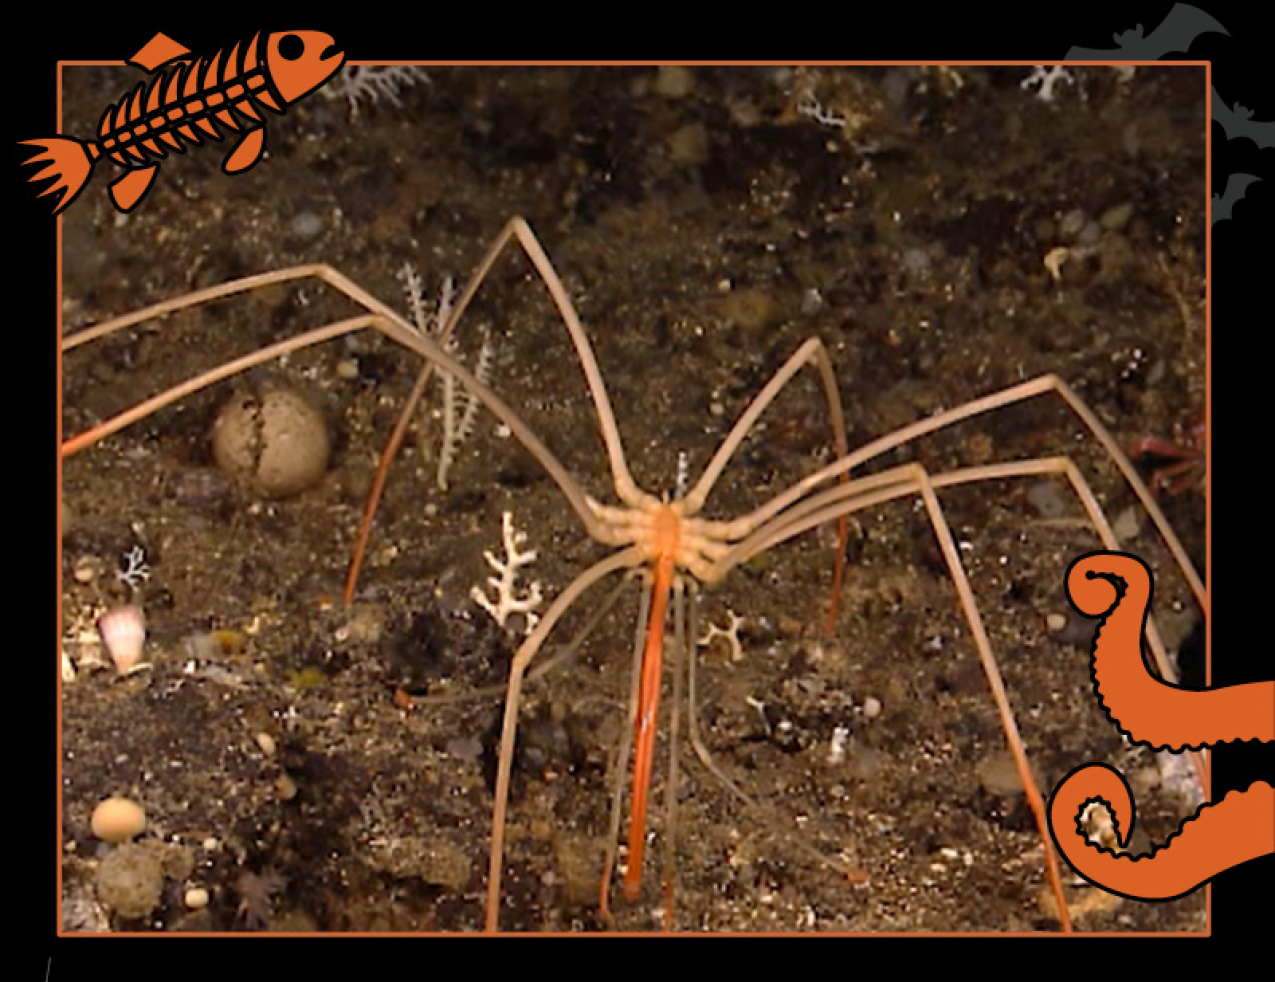 A sea spider, which has eight long legs. Border of the photo is black with orange sea creature graphics of octopus tentacles and a fish skeleton. Text: Sea spider, #NOAASpookyScience with NOAA logo.